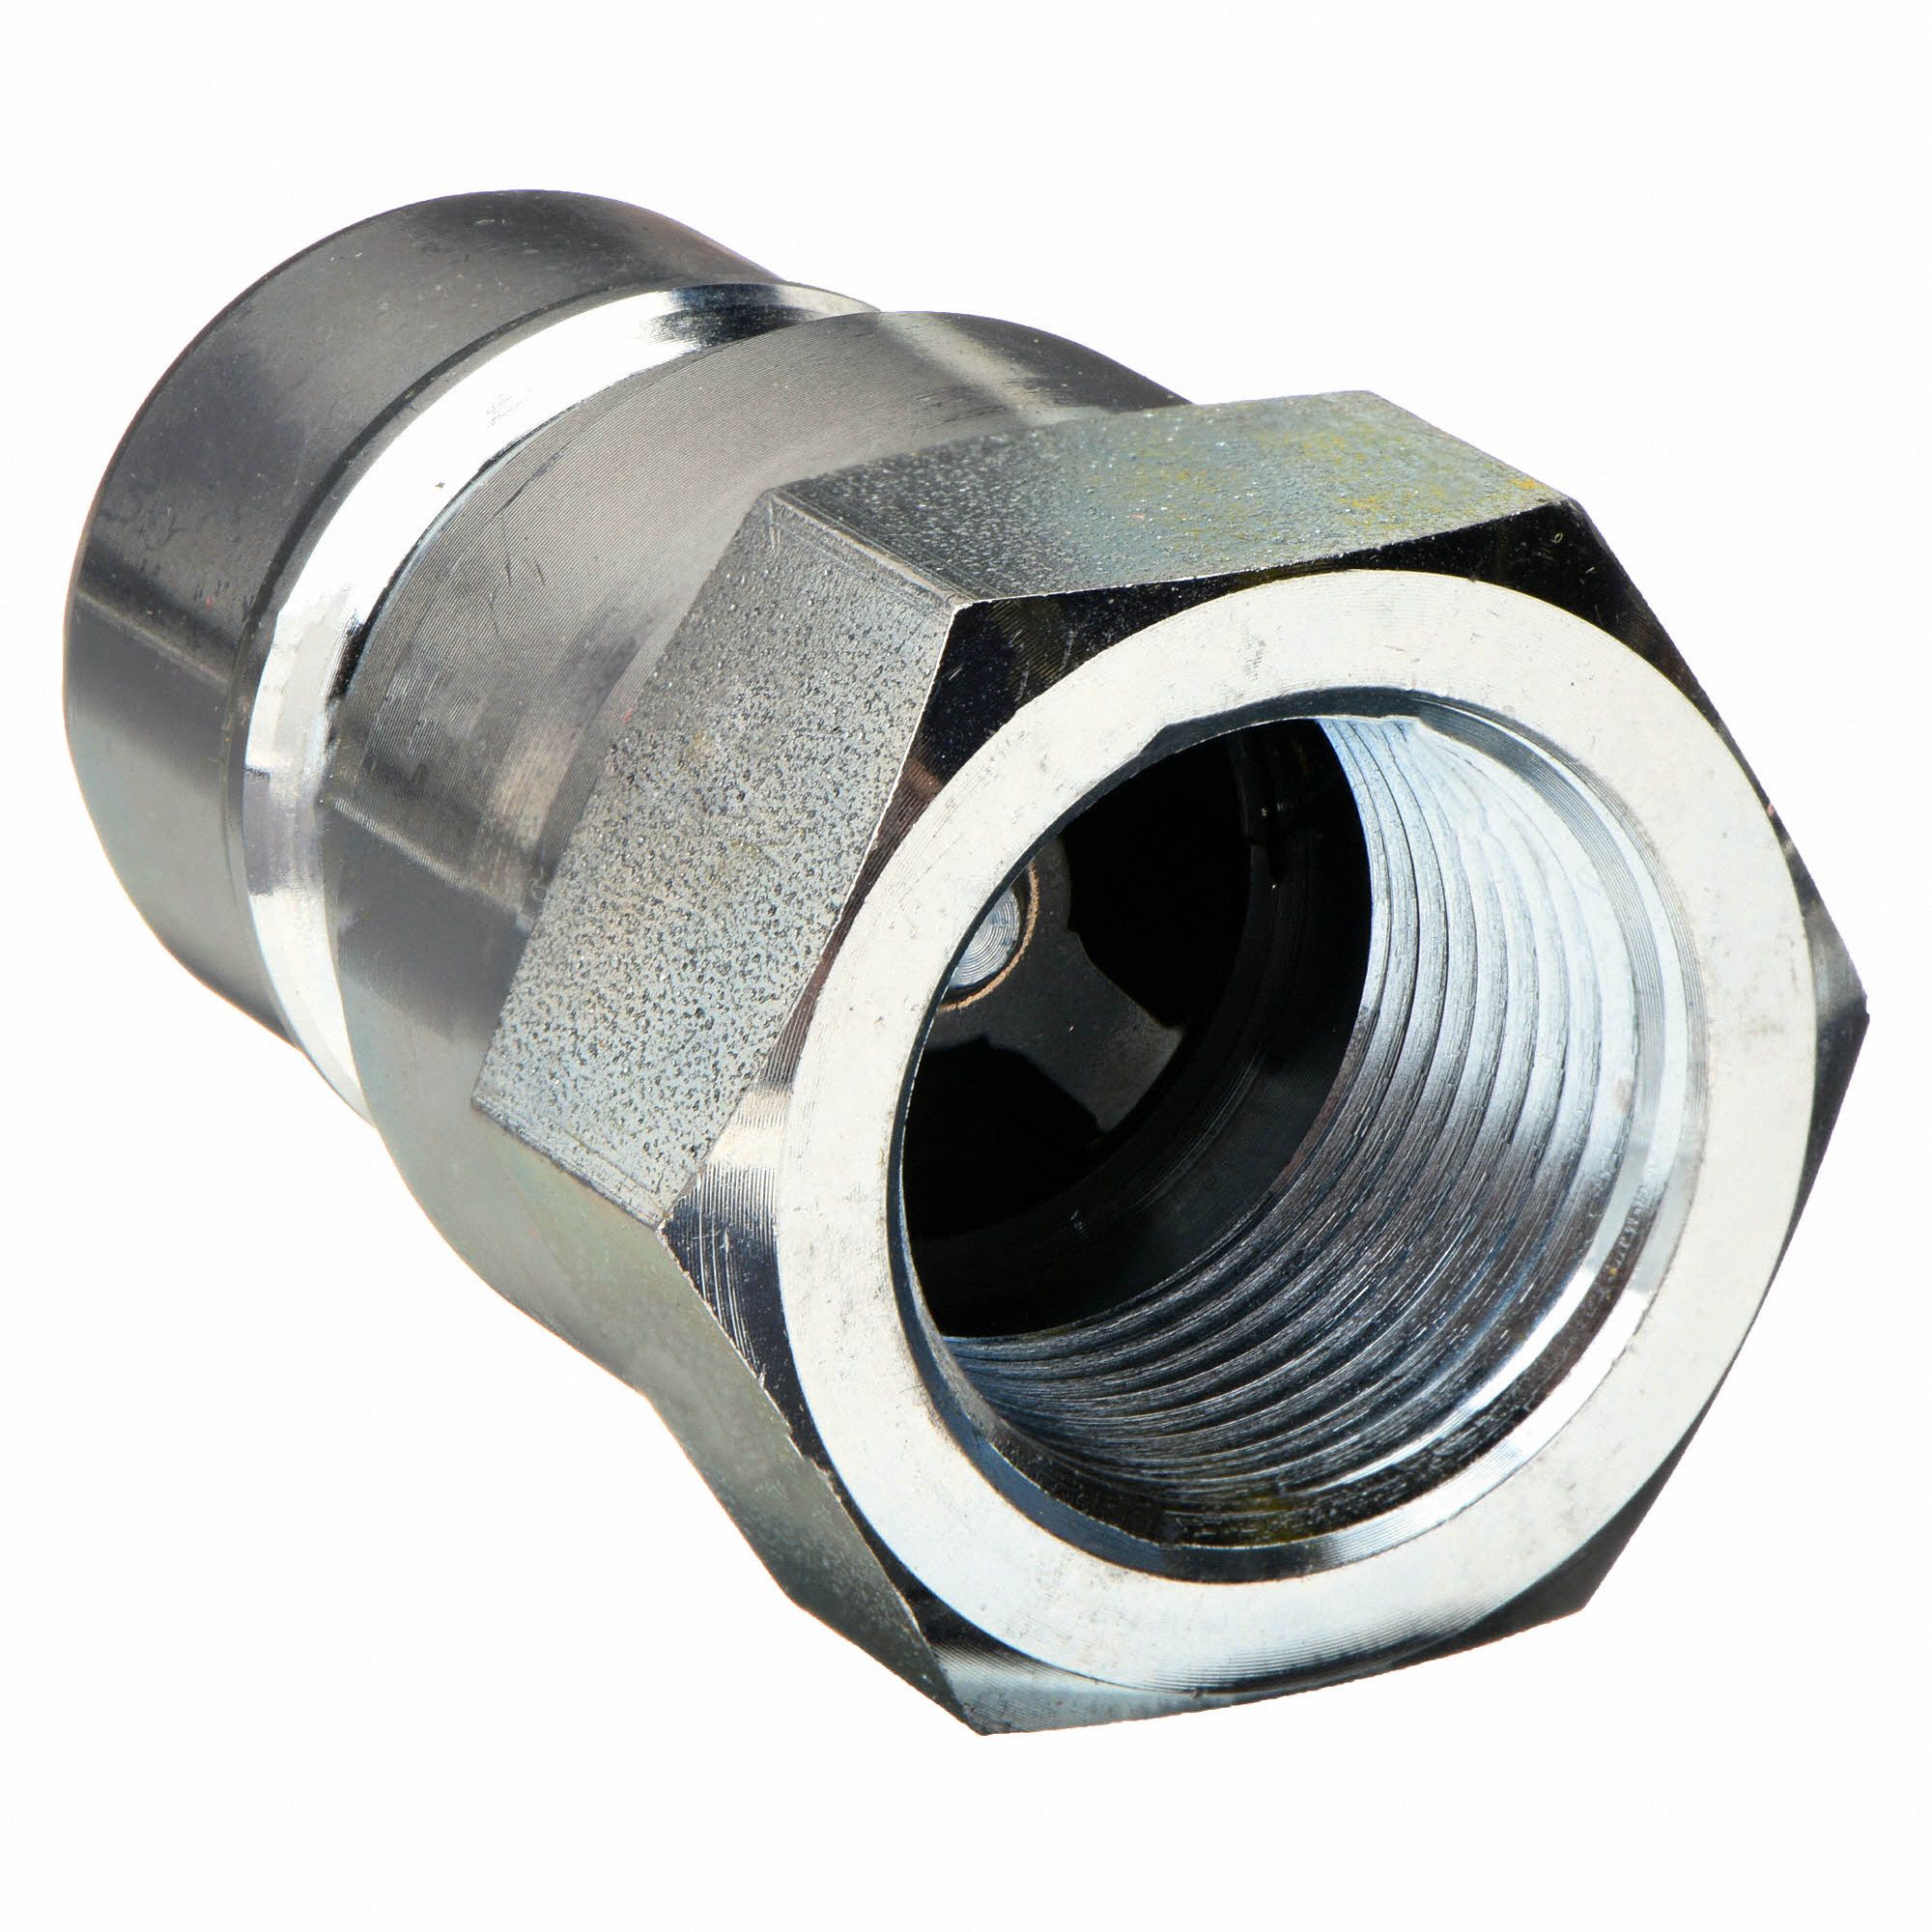 PARKER Hydraulic Quick Connect Hose Coupling: 3/4 in Coupling Size ...